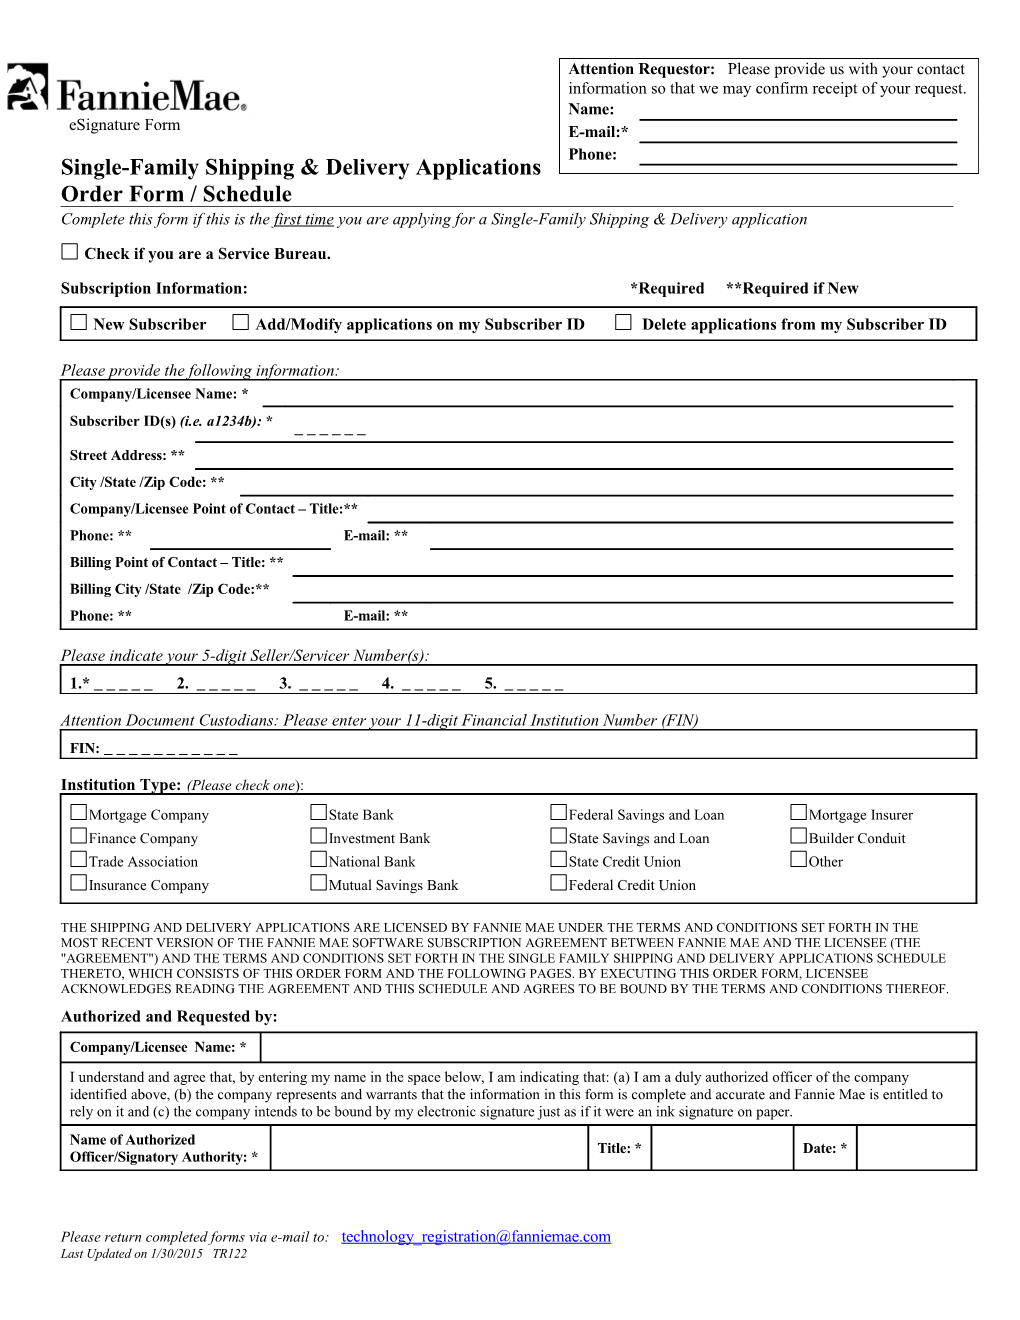 Single-Family Shipping & Delivery Applications s1